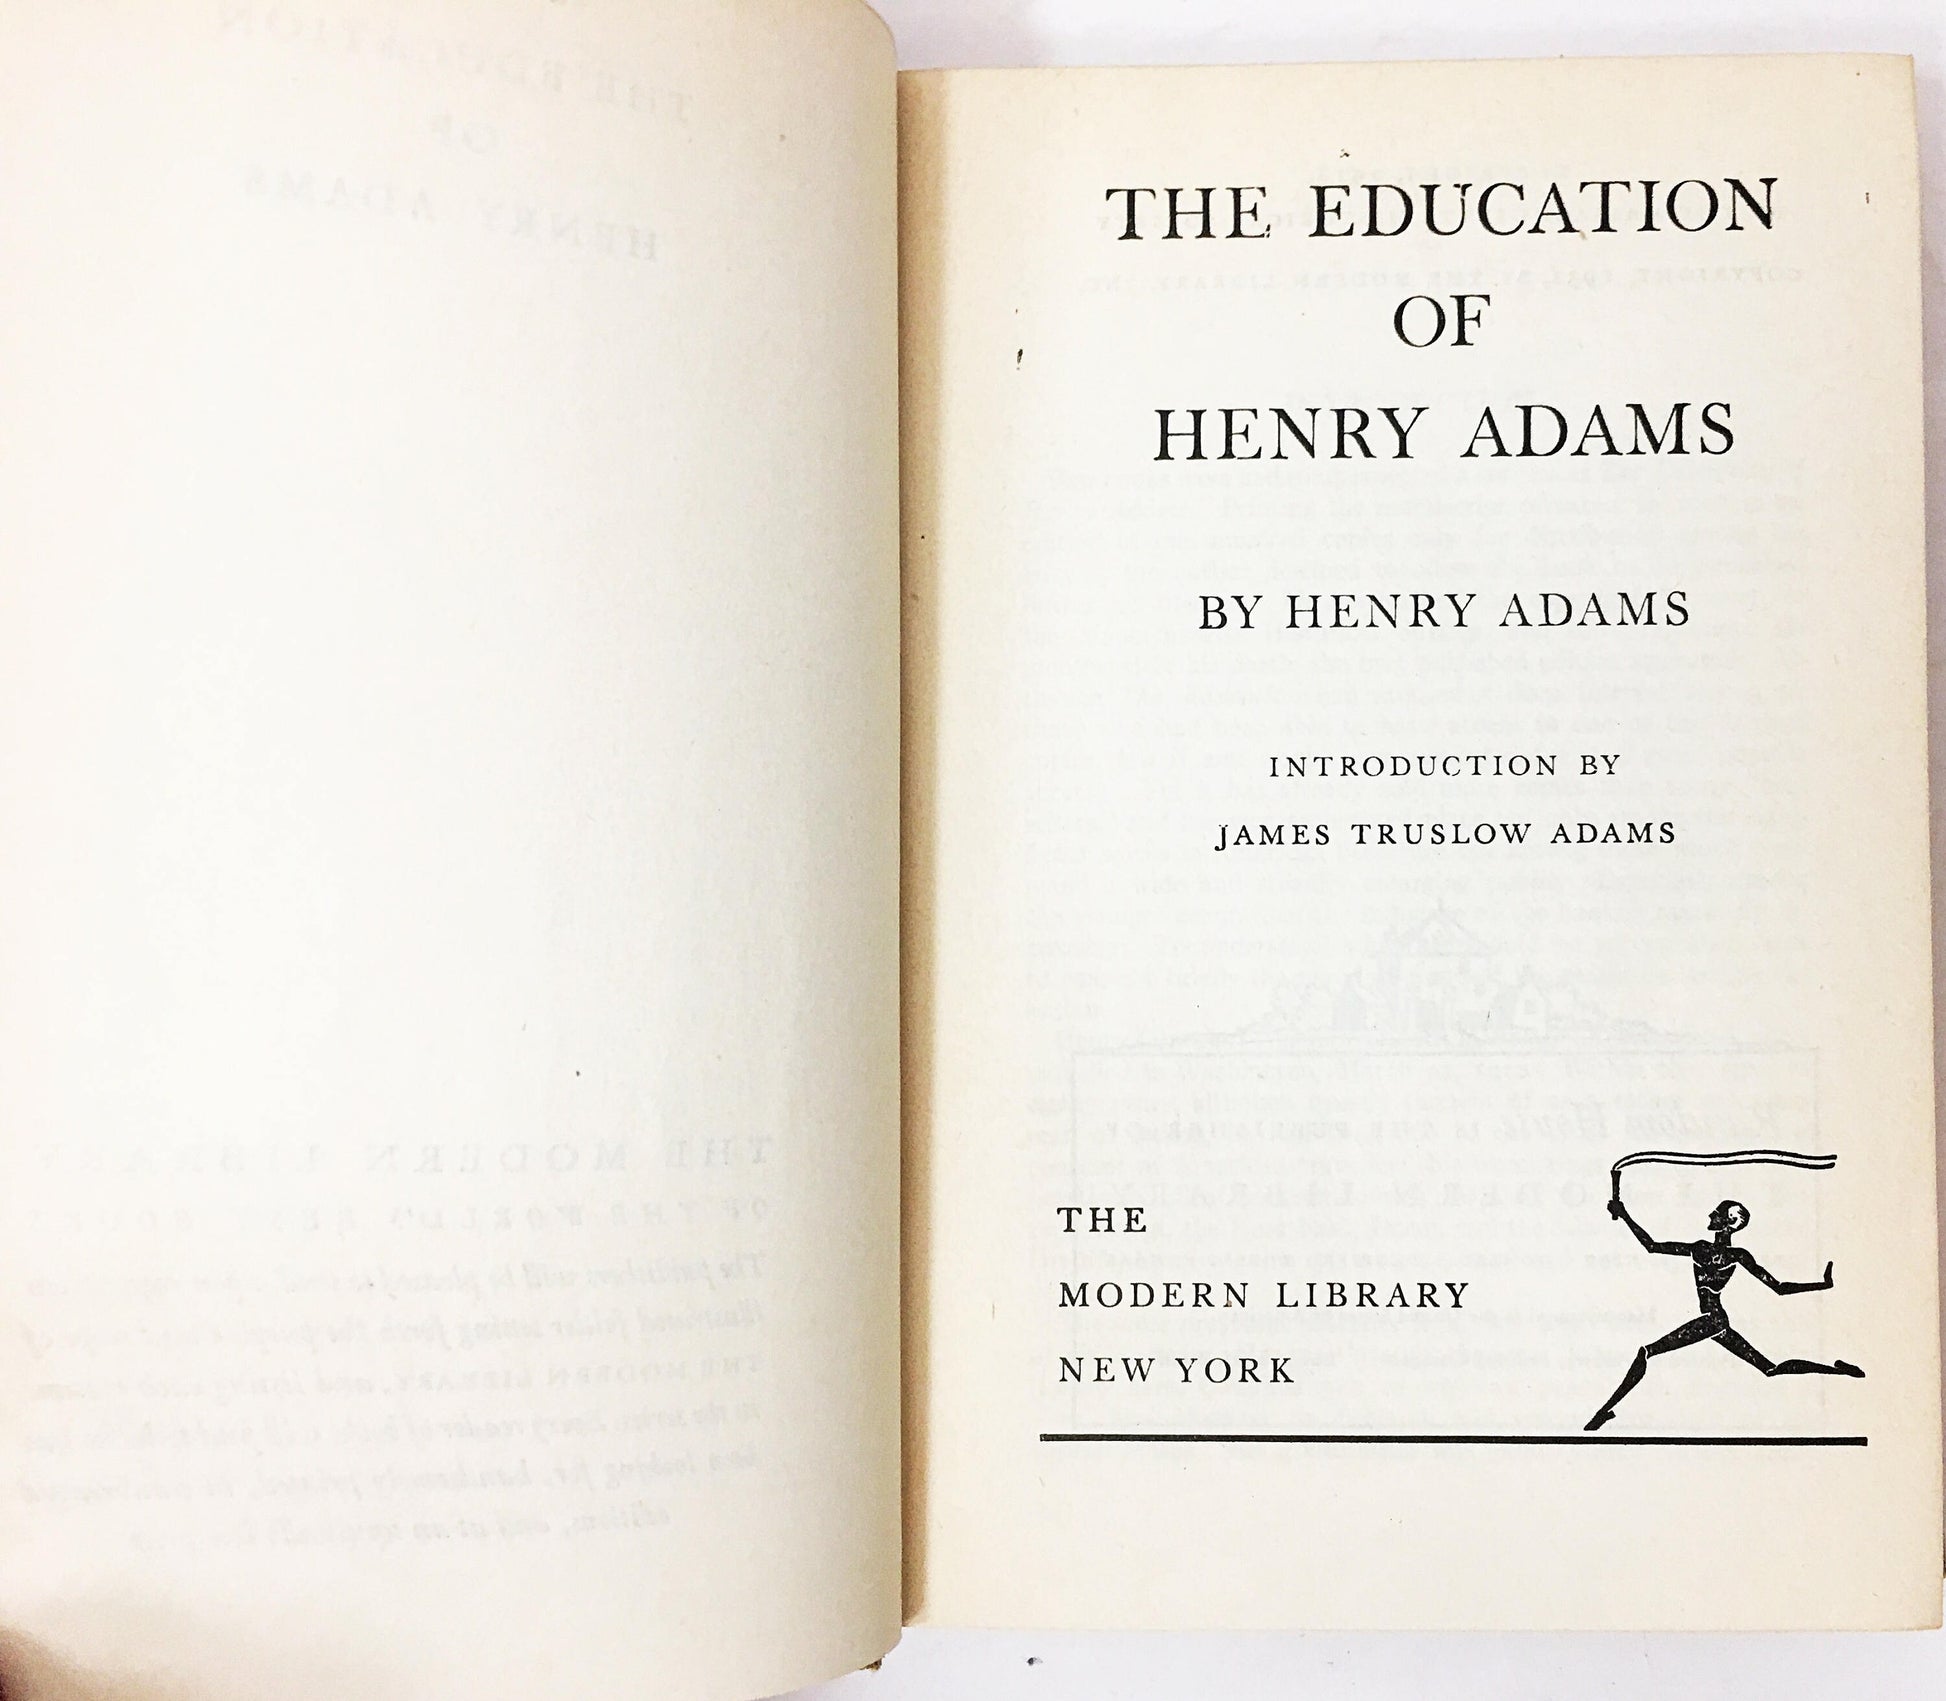 1931 Education of Henry Adams Vintage Modern Library book Gray home office decor. Autobiography of struggle with youth in Boston